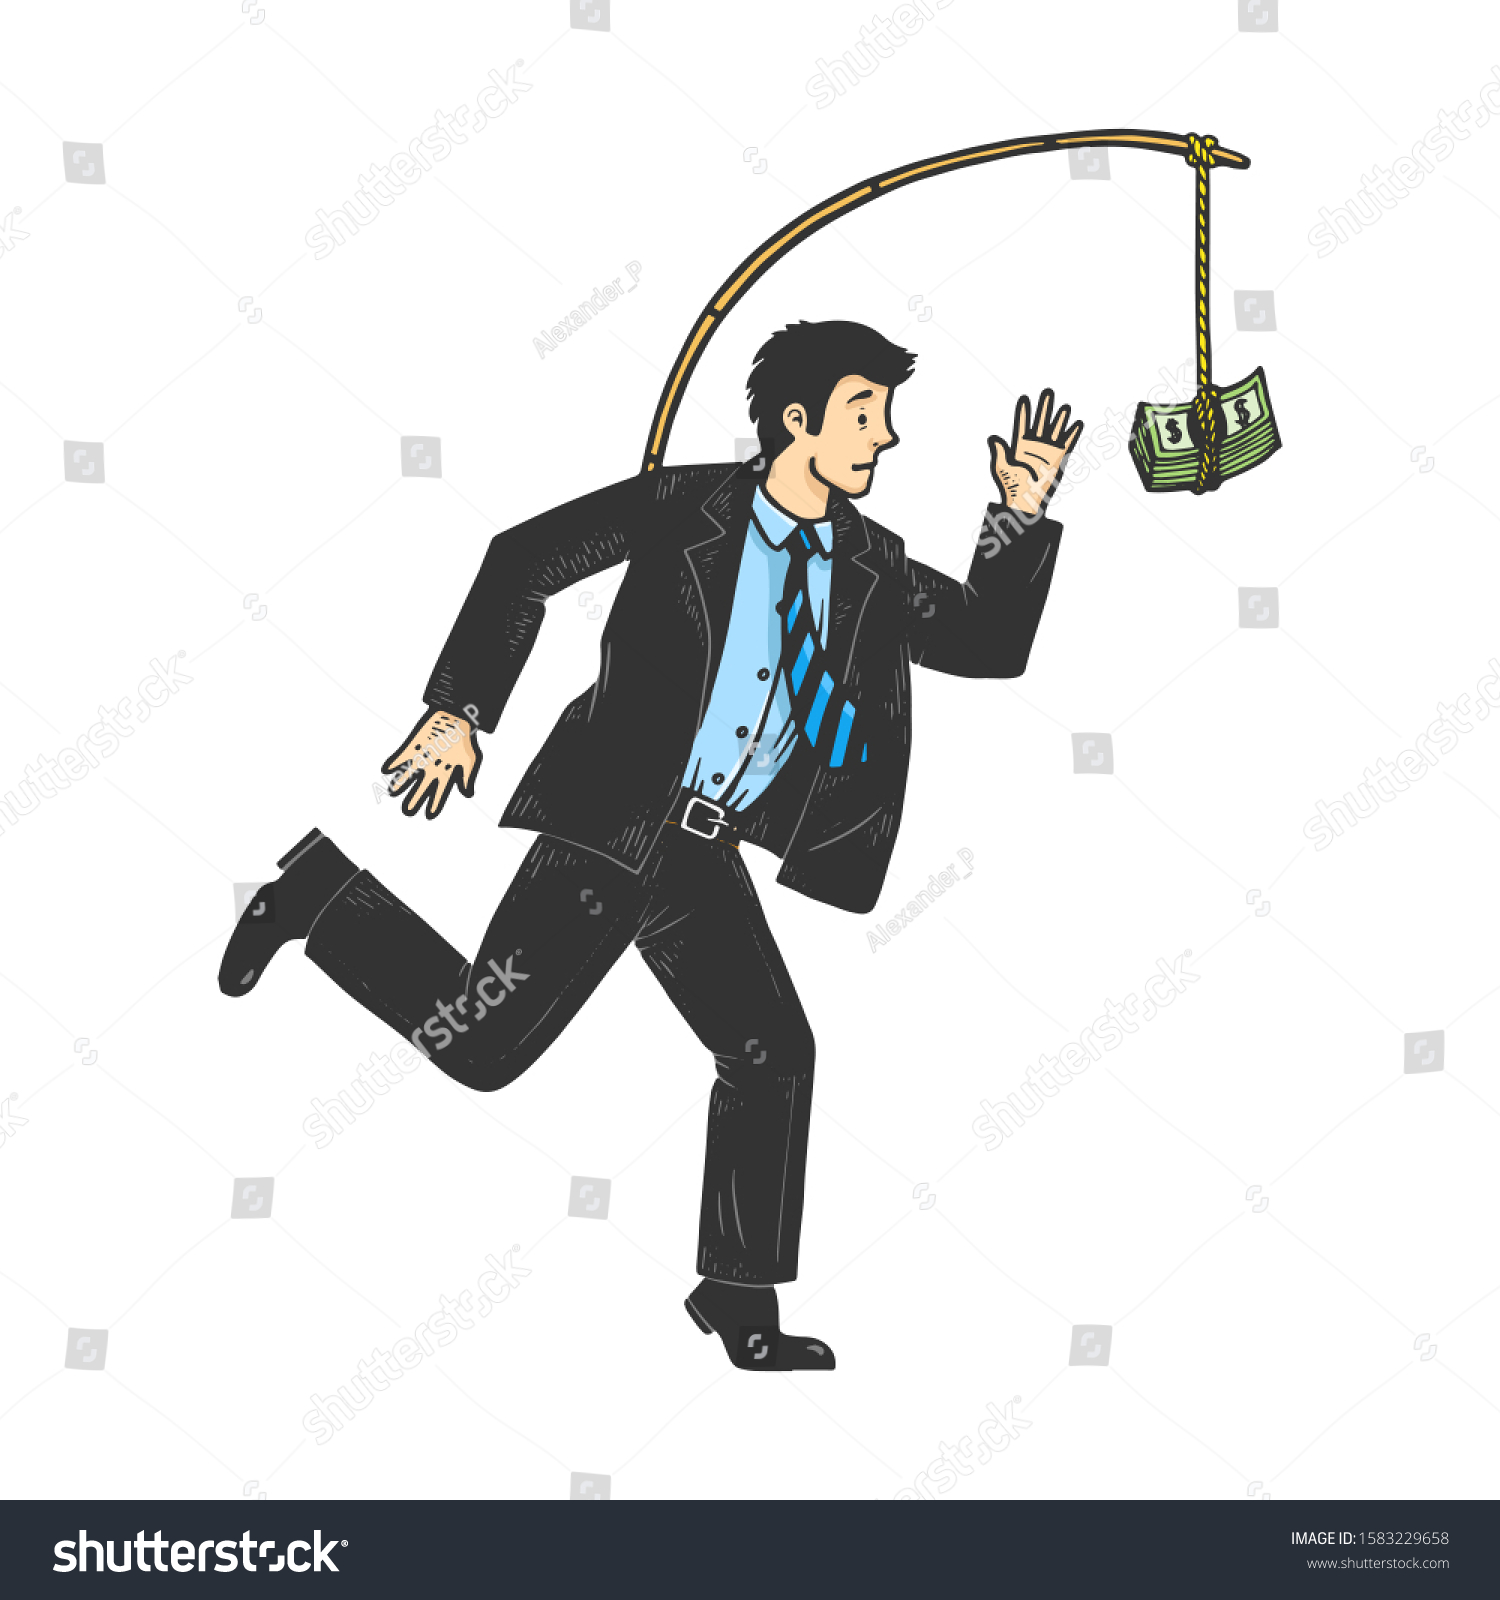 SVG of Businessman chasing money that is tied to him sketch engraving vector illustration. Metaphor of hedonic treadmill. T-shirt apparel print design. Scratch board style imitation.  svg